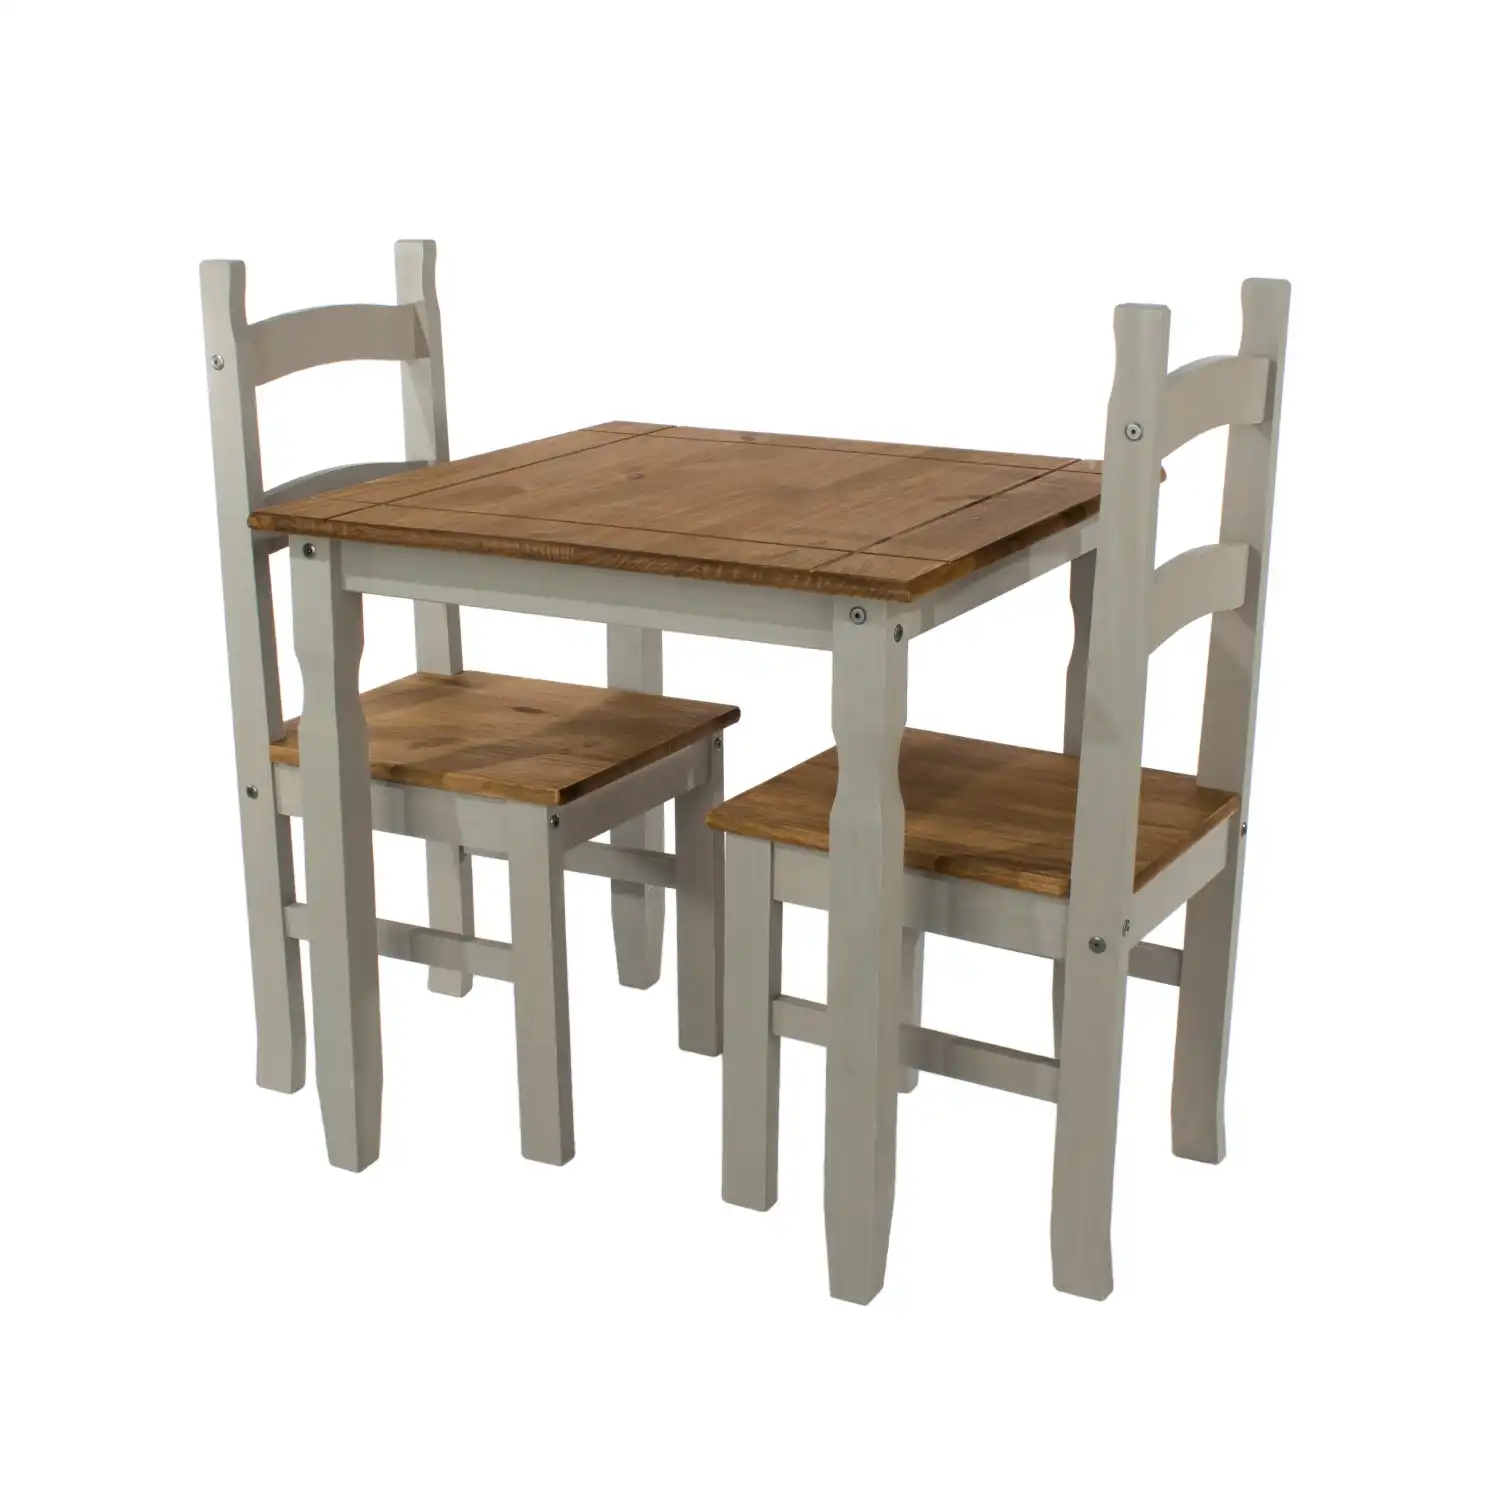 Grey Pine Wood Square Dining Table and 2 Chairs Set